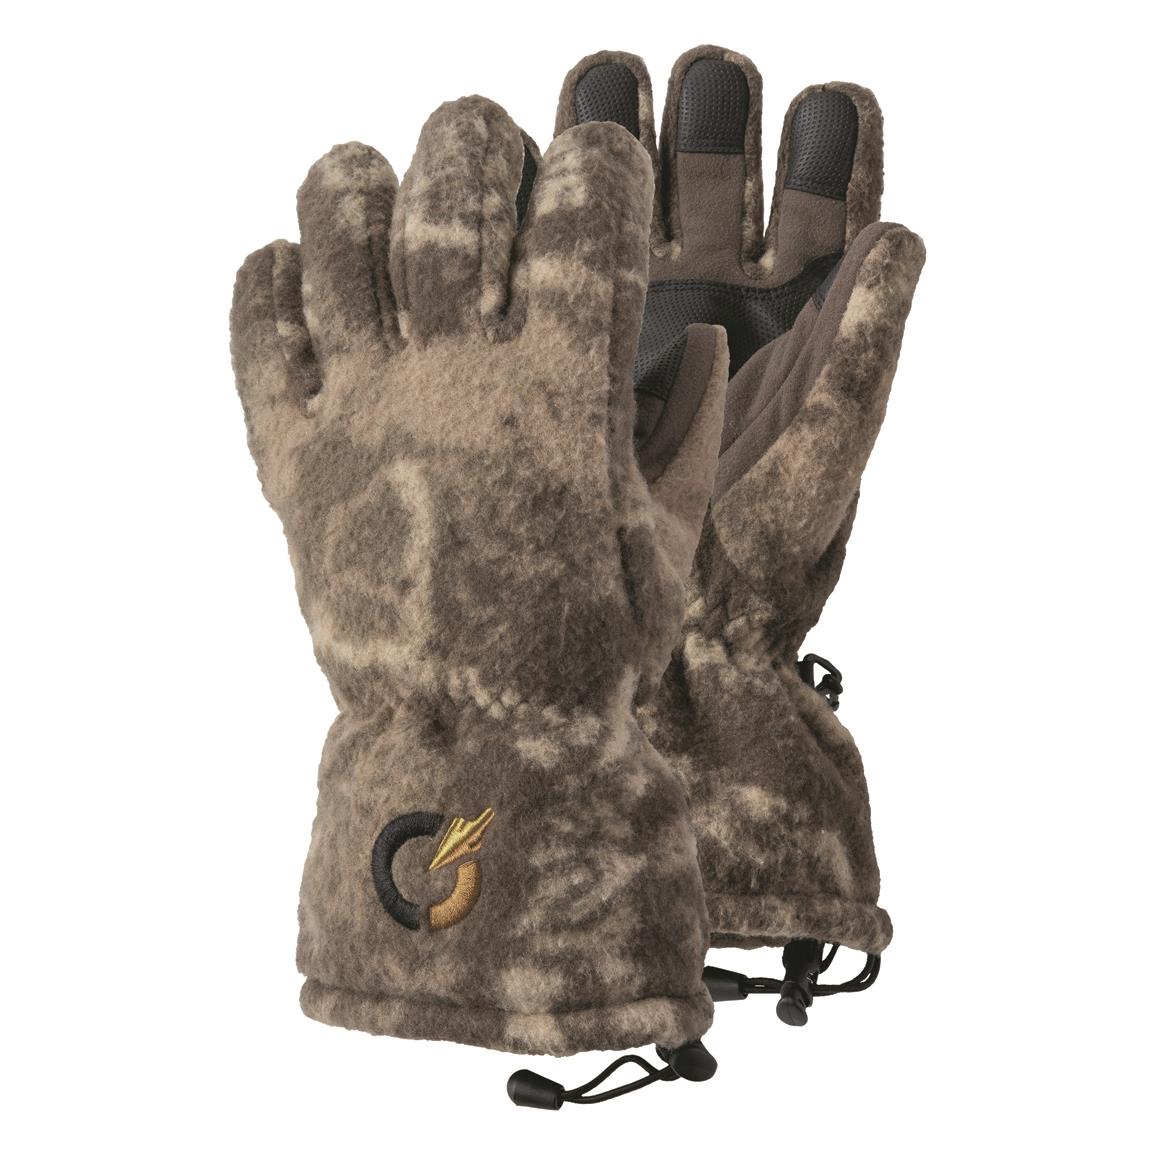 Code of Silence Closure Hunting Gloves, Camo